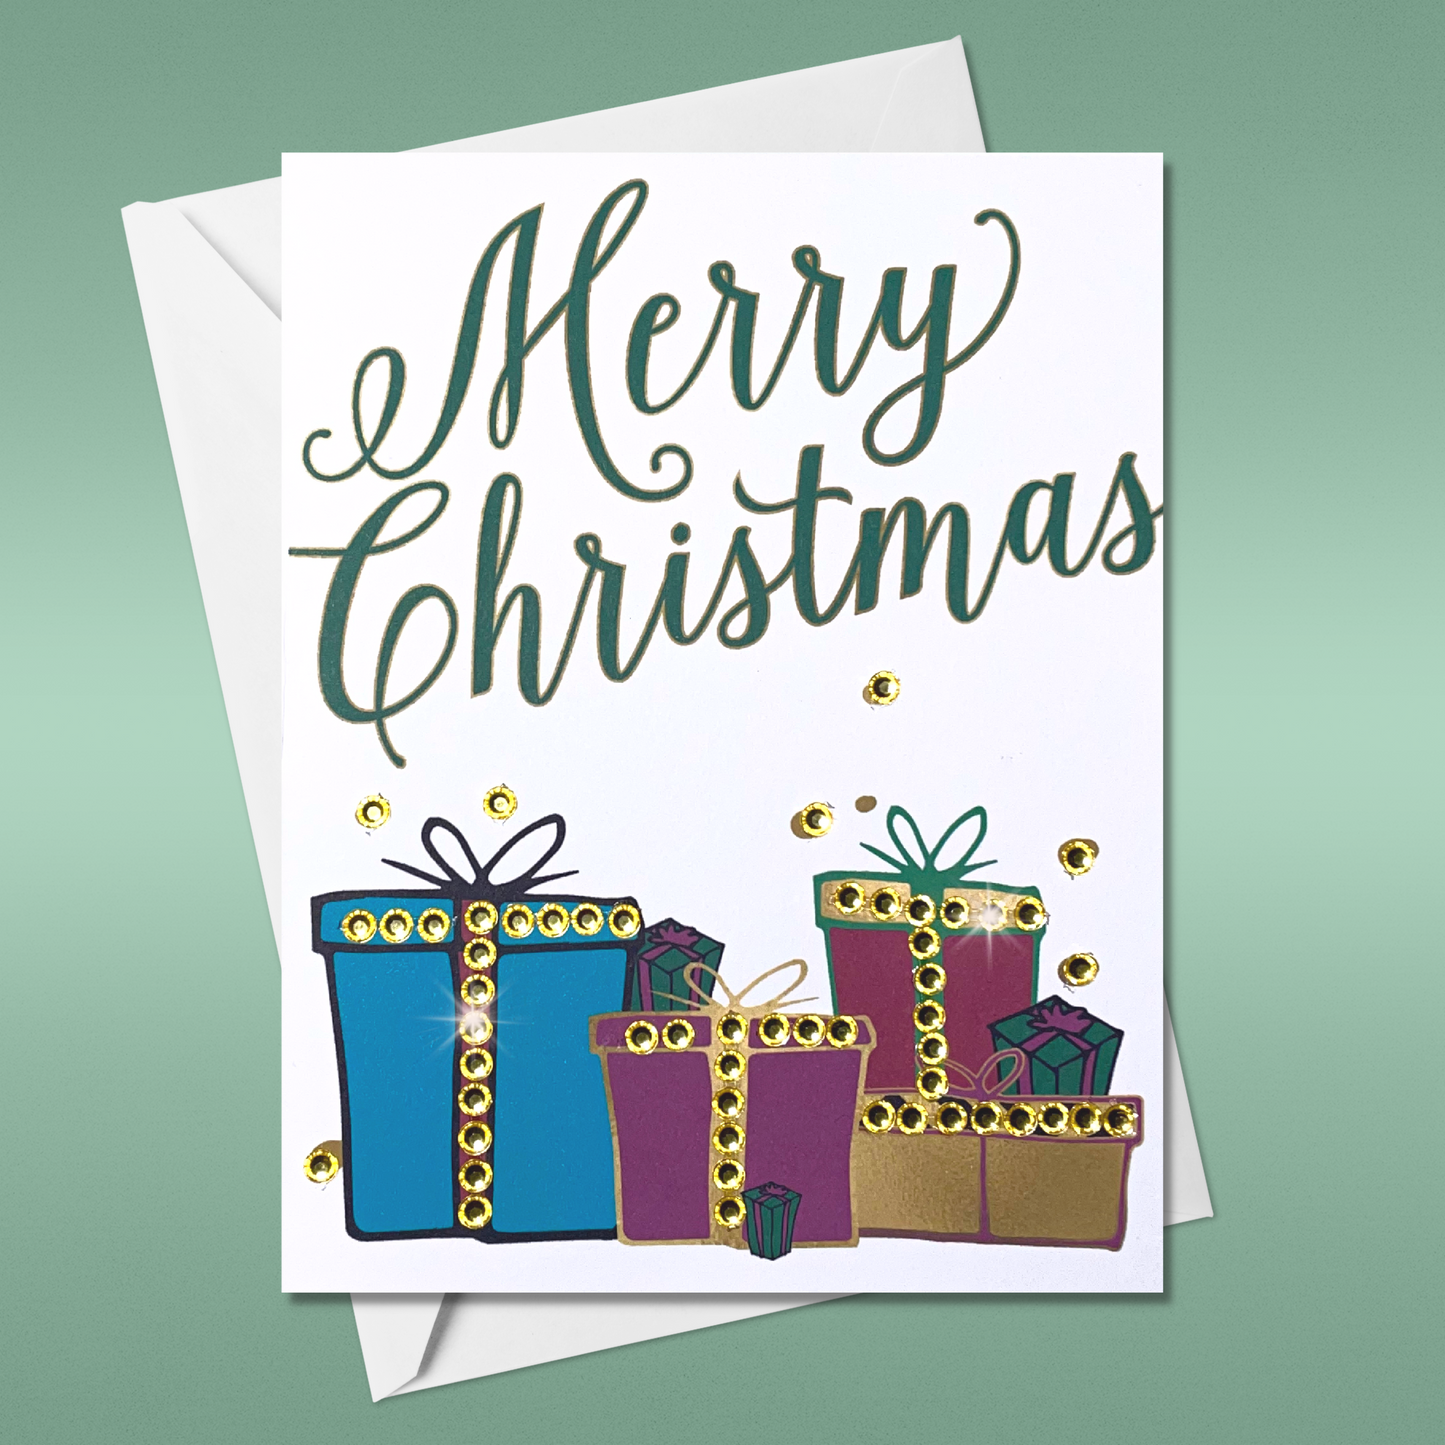 Merry Christmas! Holiday Greeting Card with presents